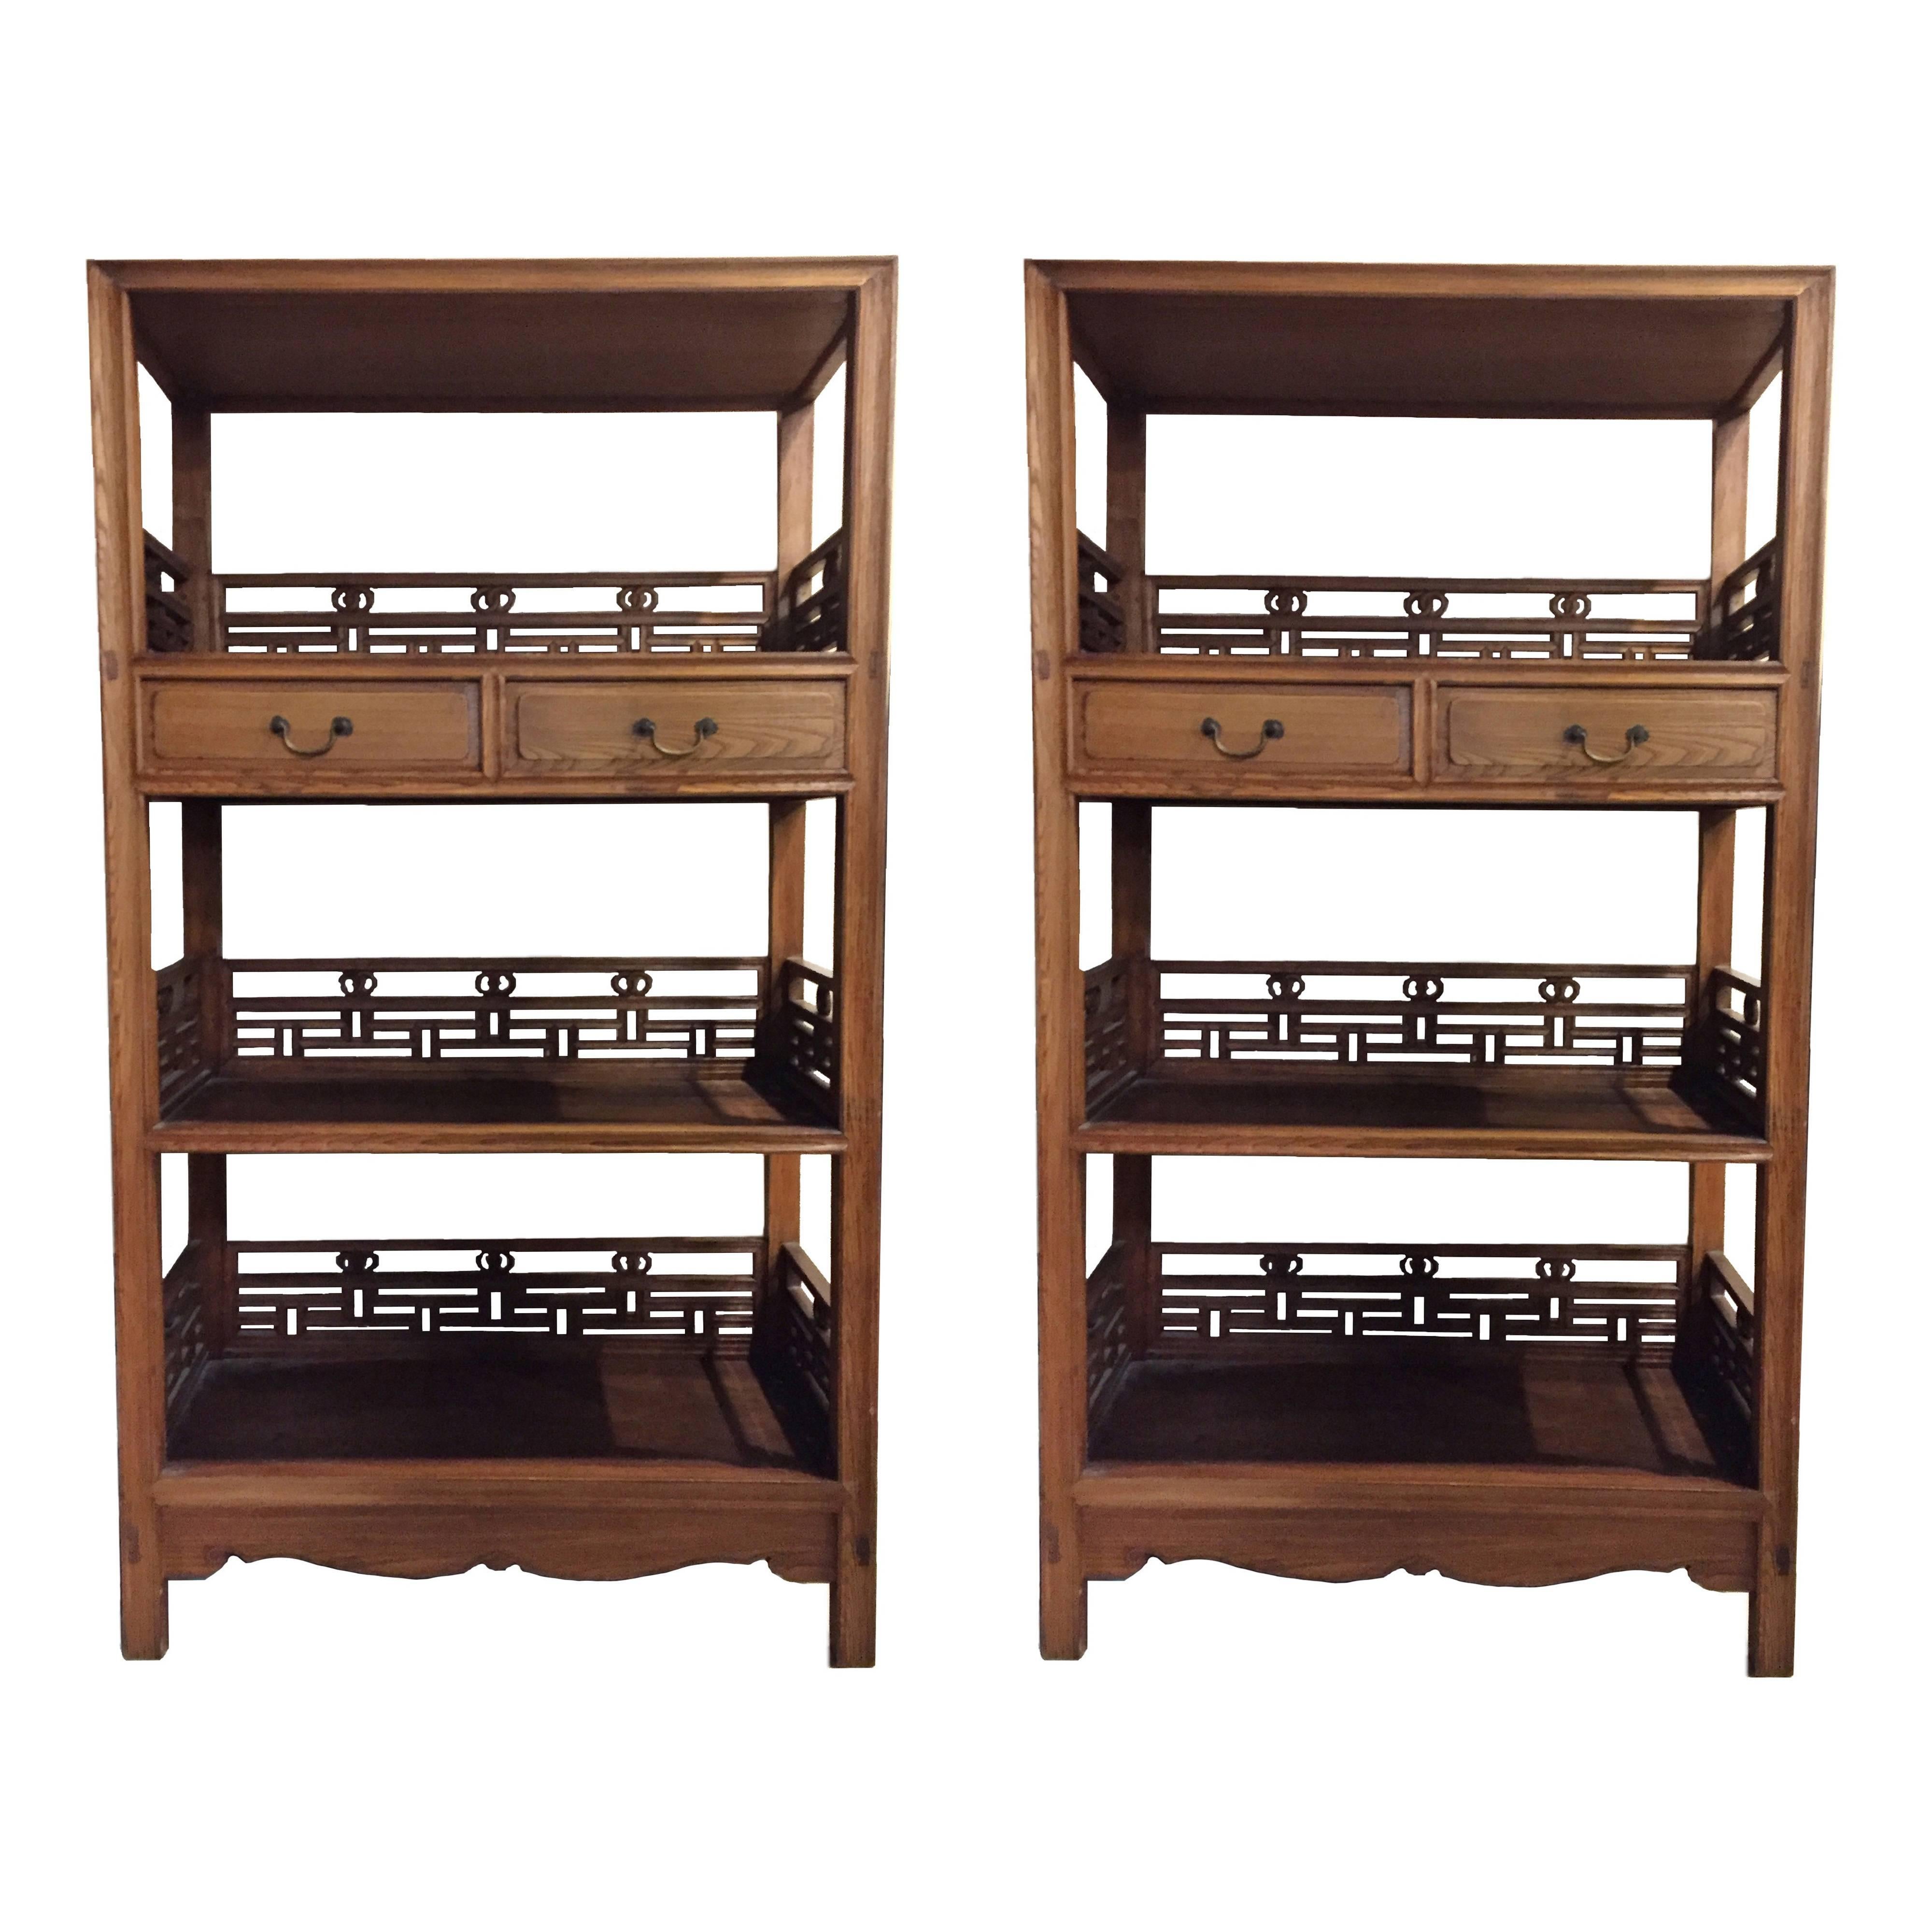 Pair of Asian Bookcase with Lattice Work